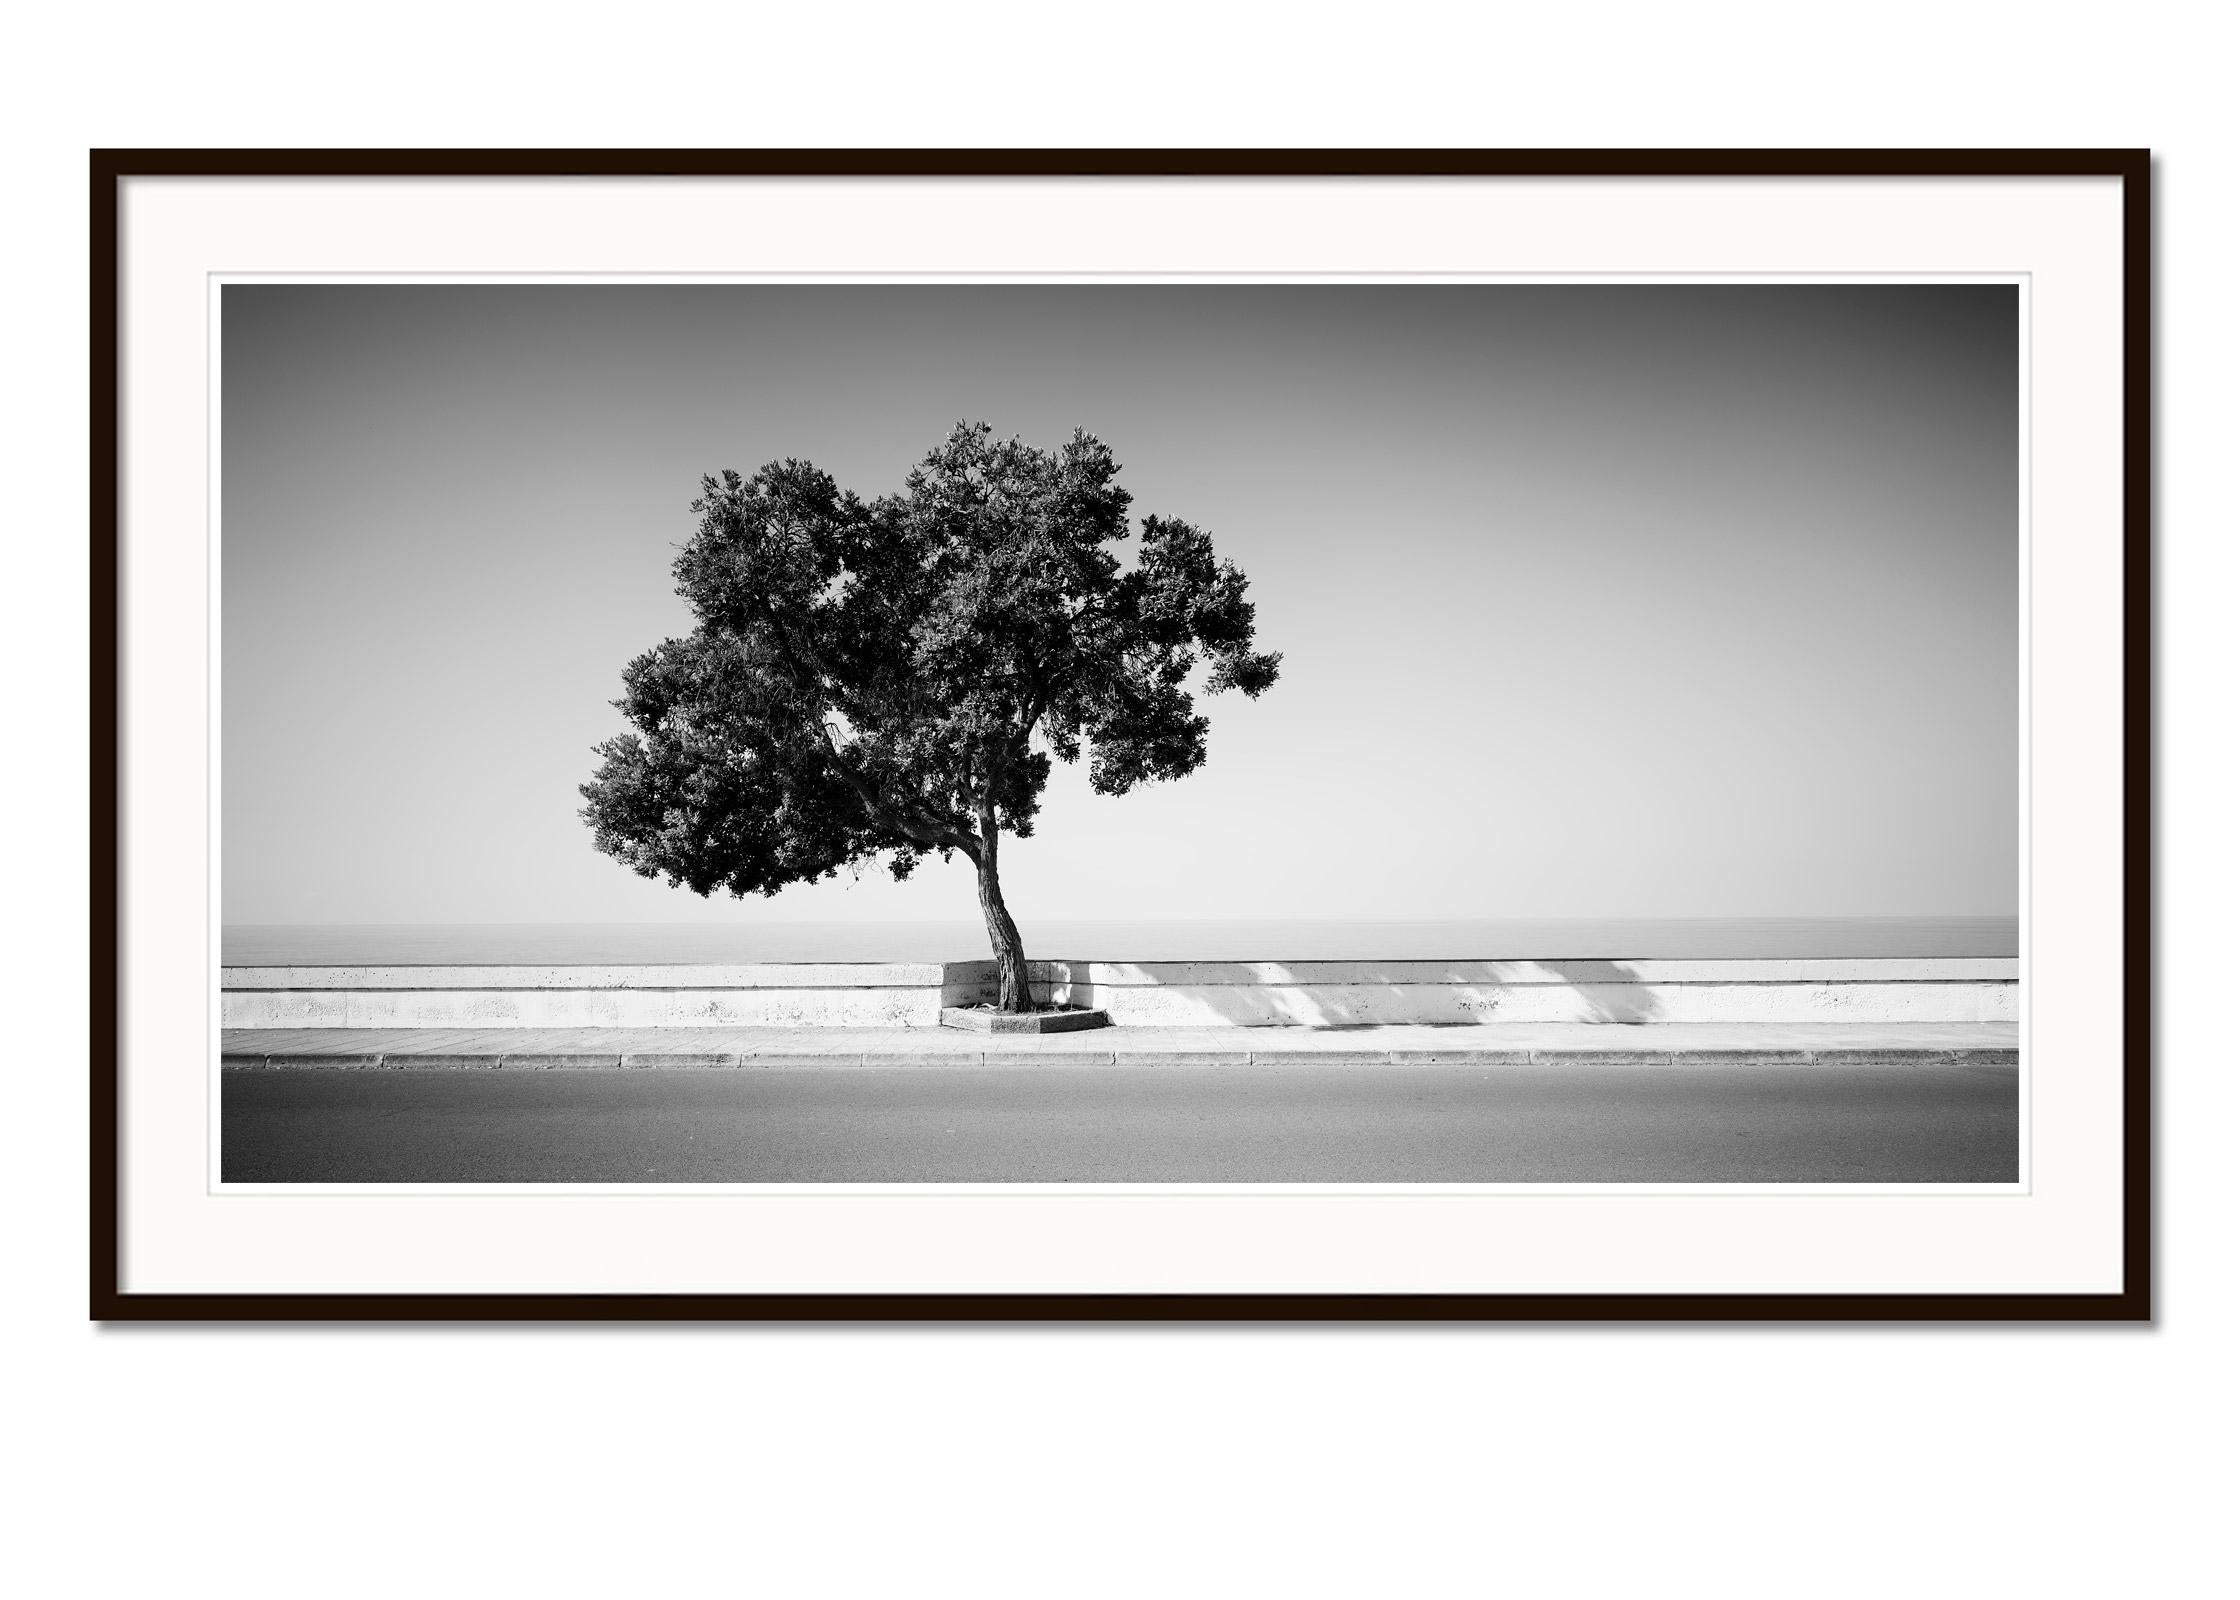 Tree on the Waterfront, Portugal, black and white photography, art landscape - Contemporary Photograph by Gerald Berghammer